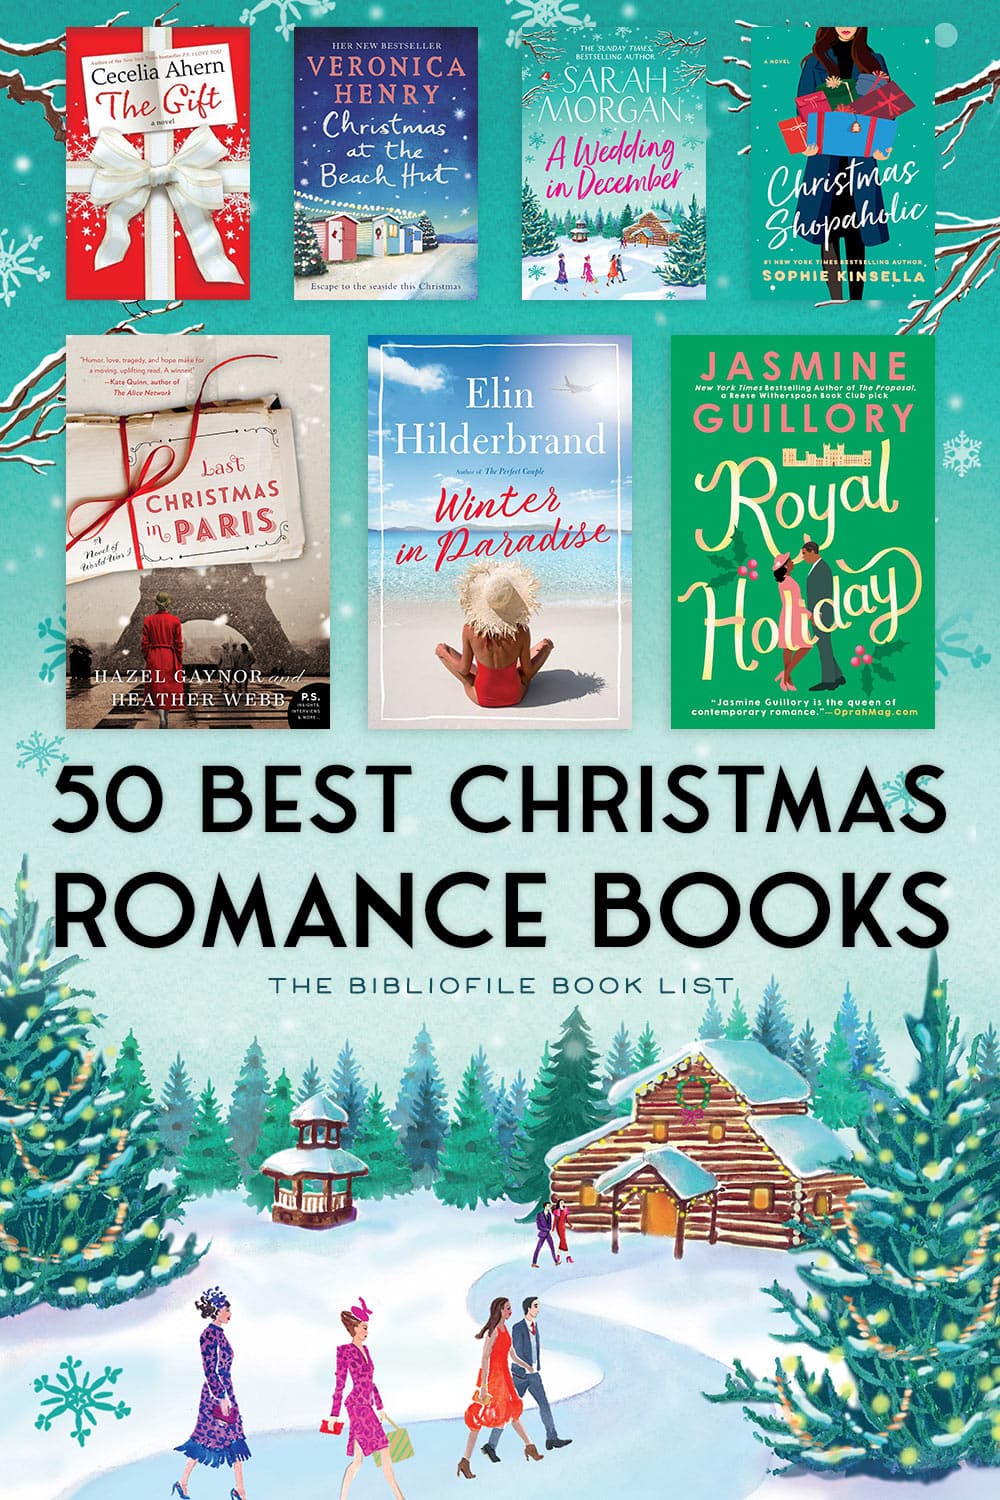 50 Best Christmas Romance Books for the Holidays The Bibliofile